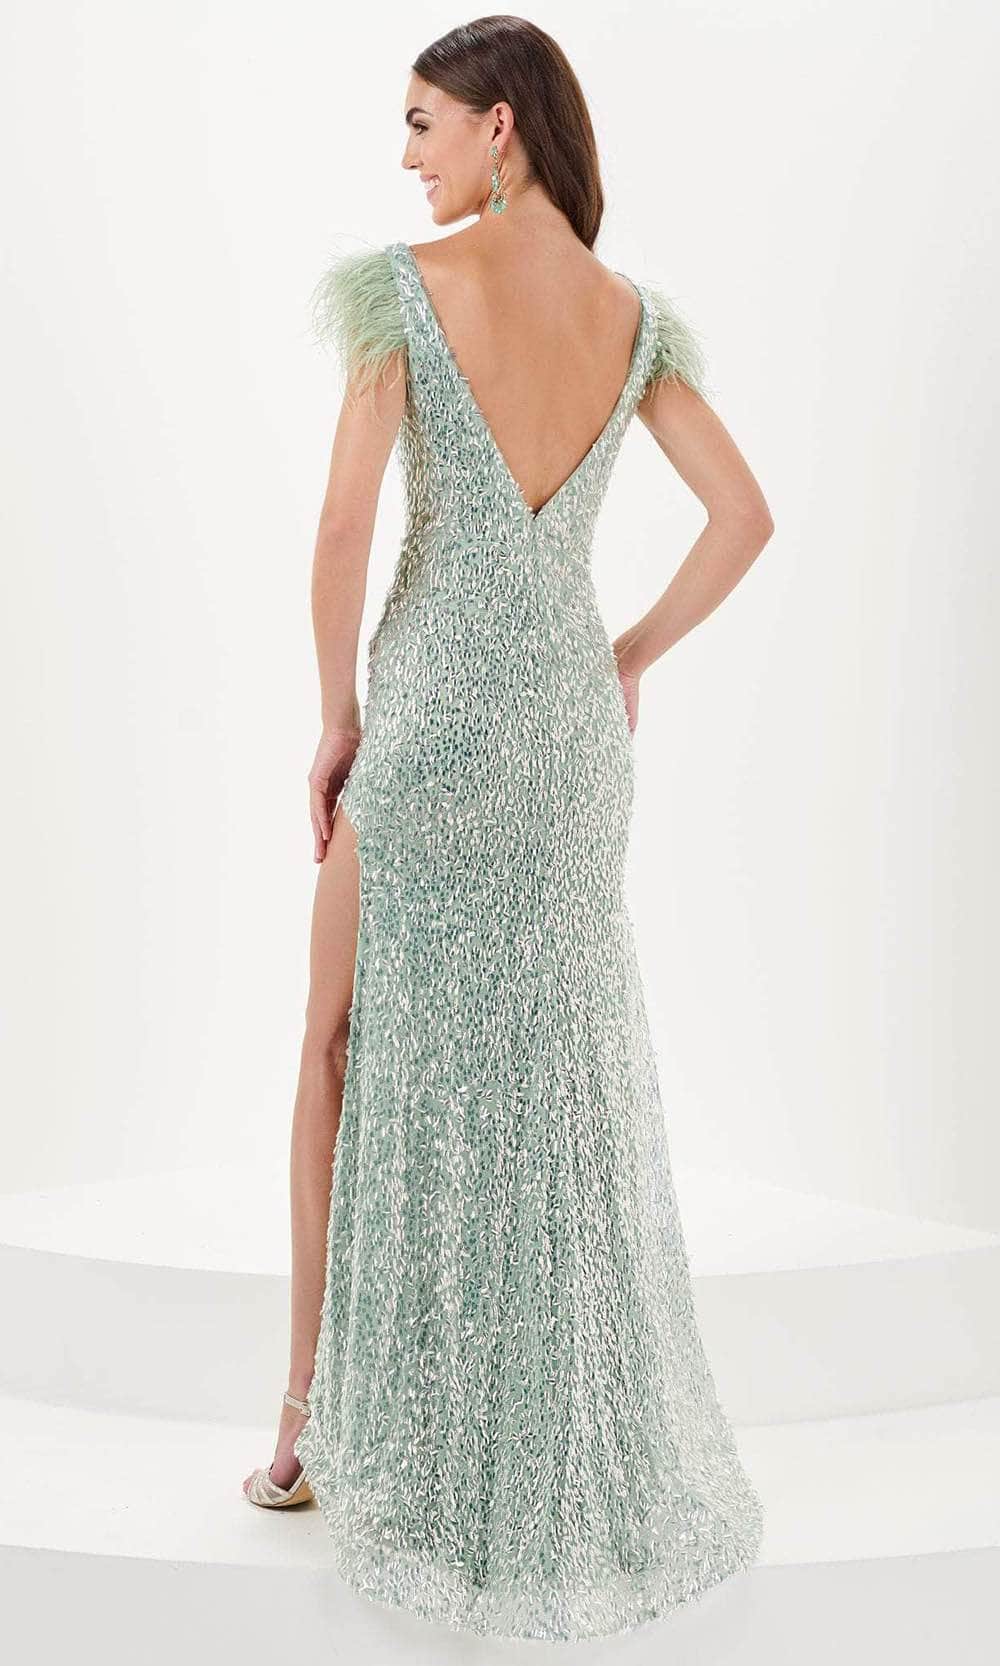 Tiffany Designs 16055 - Feather Plunged Evening Gown Evening Gown